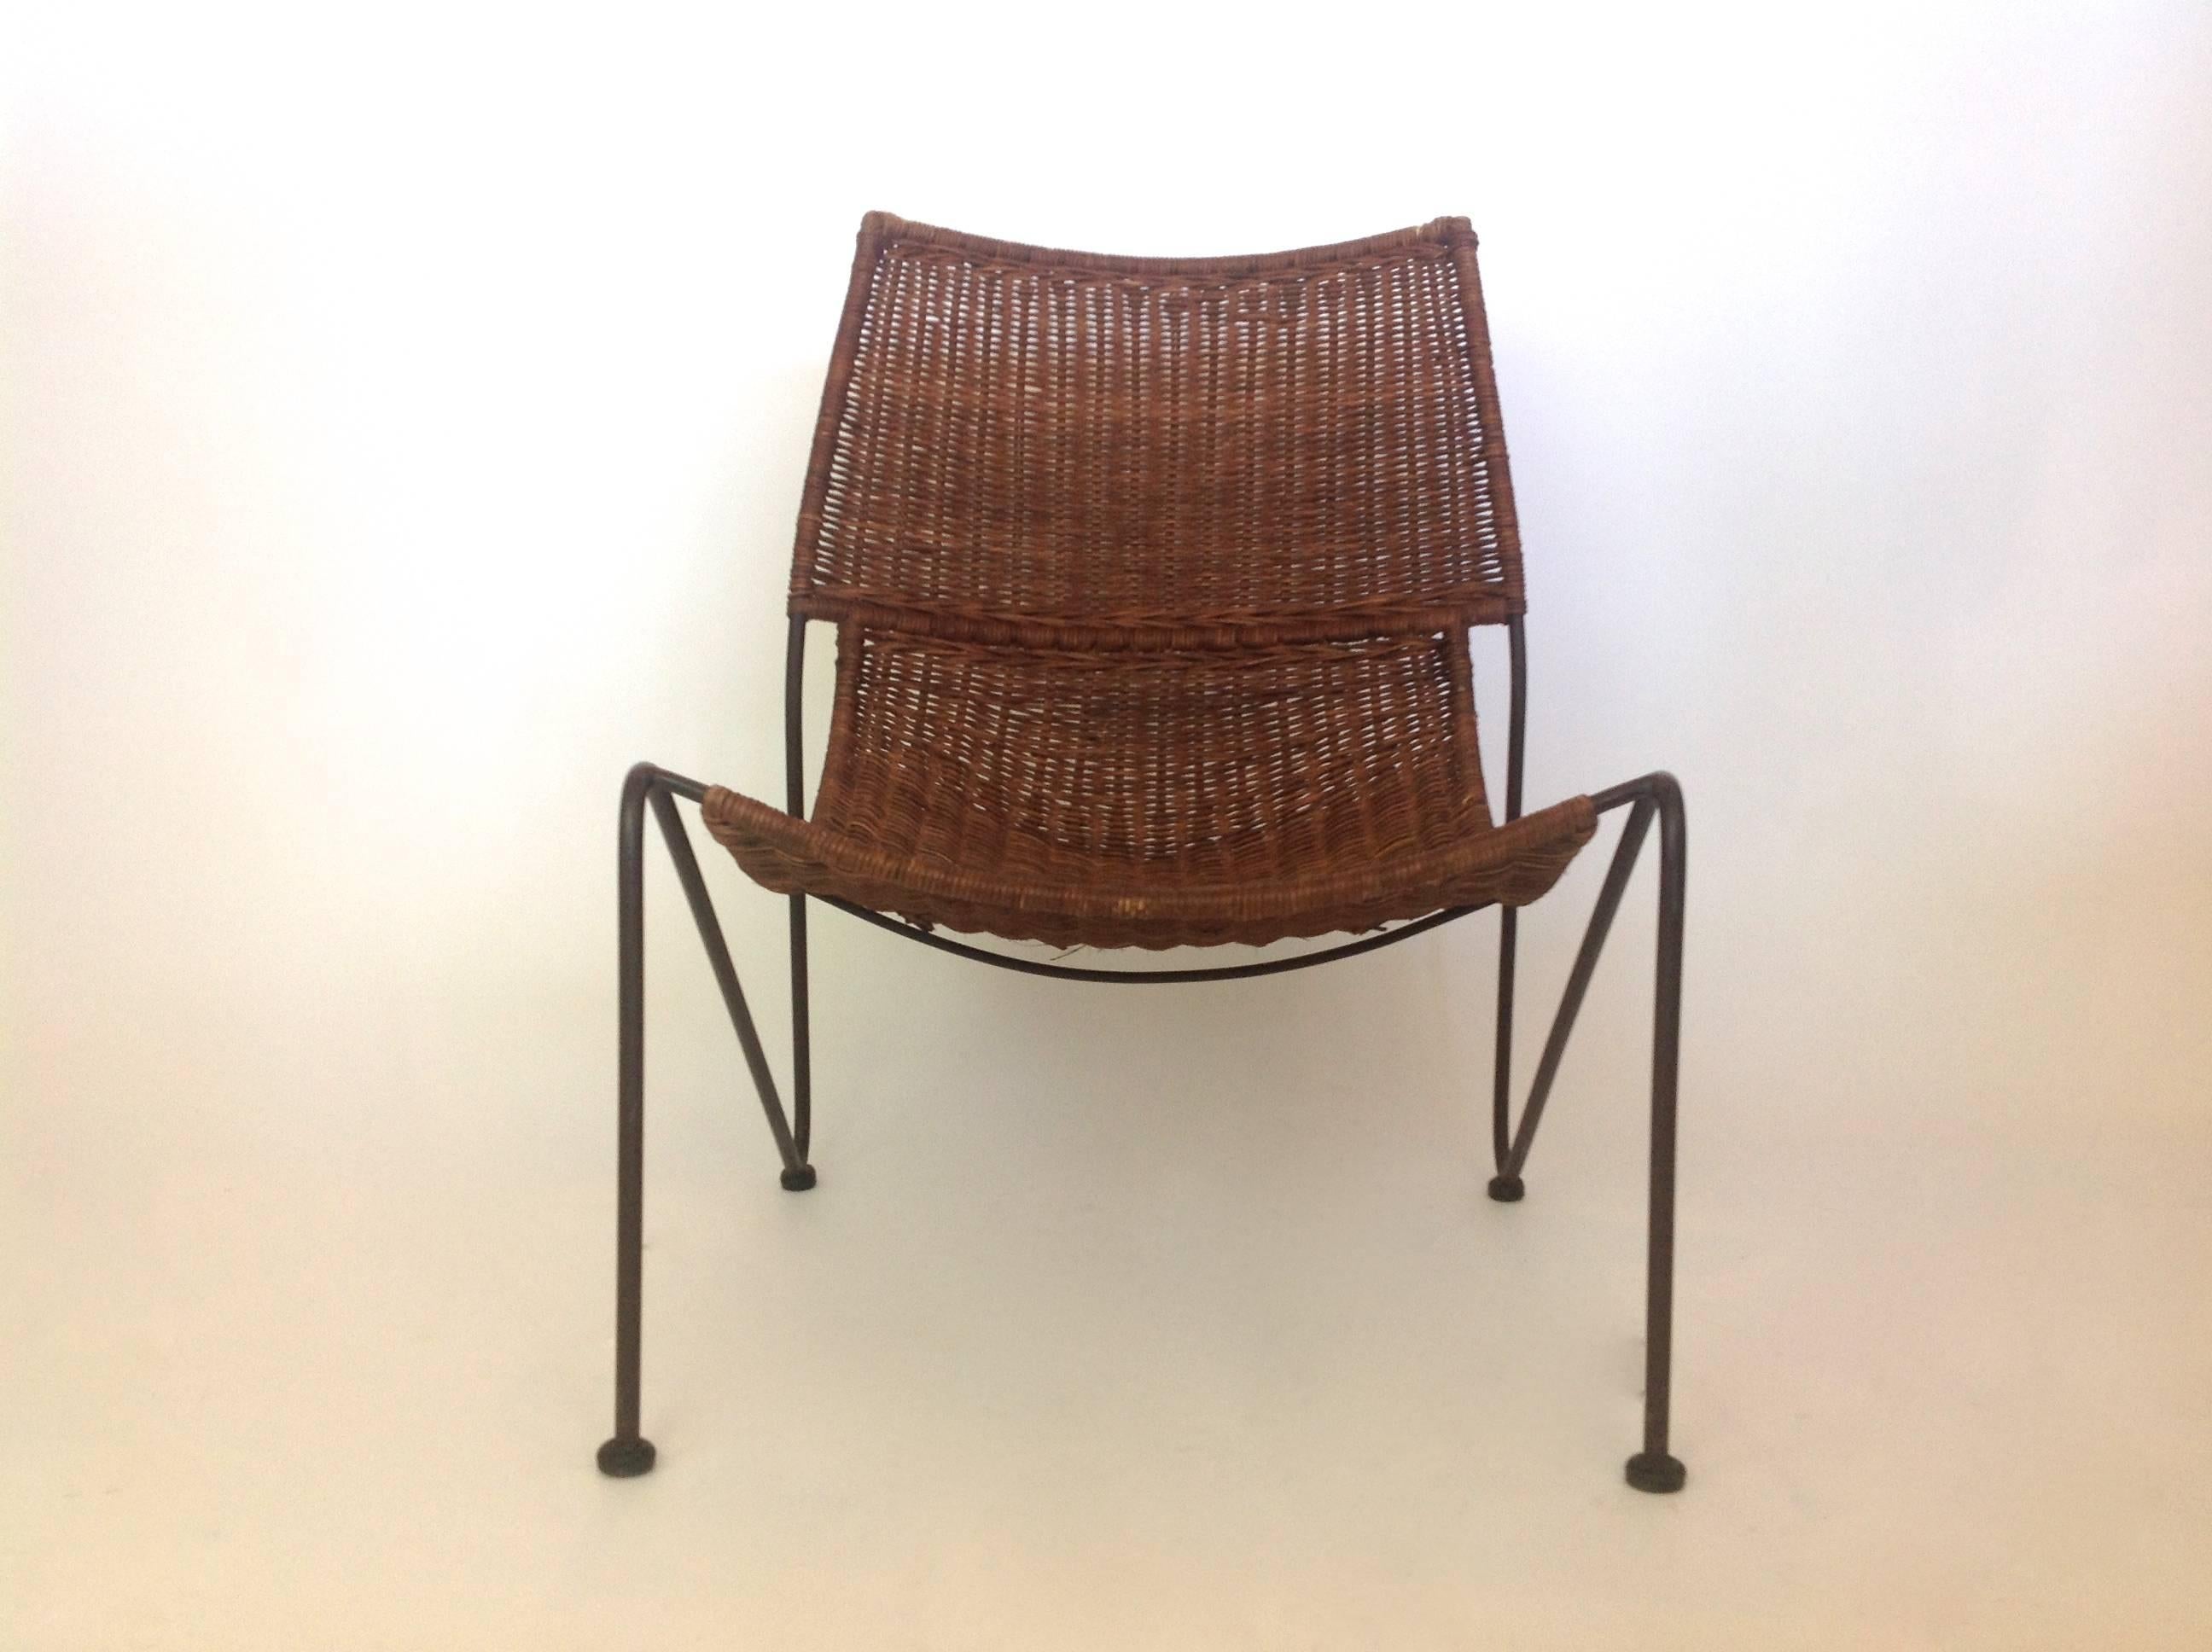 Contemporary Iron and Wicker Scoop Chair